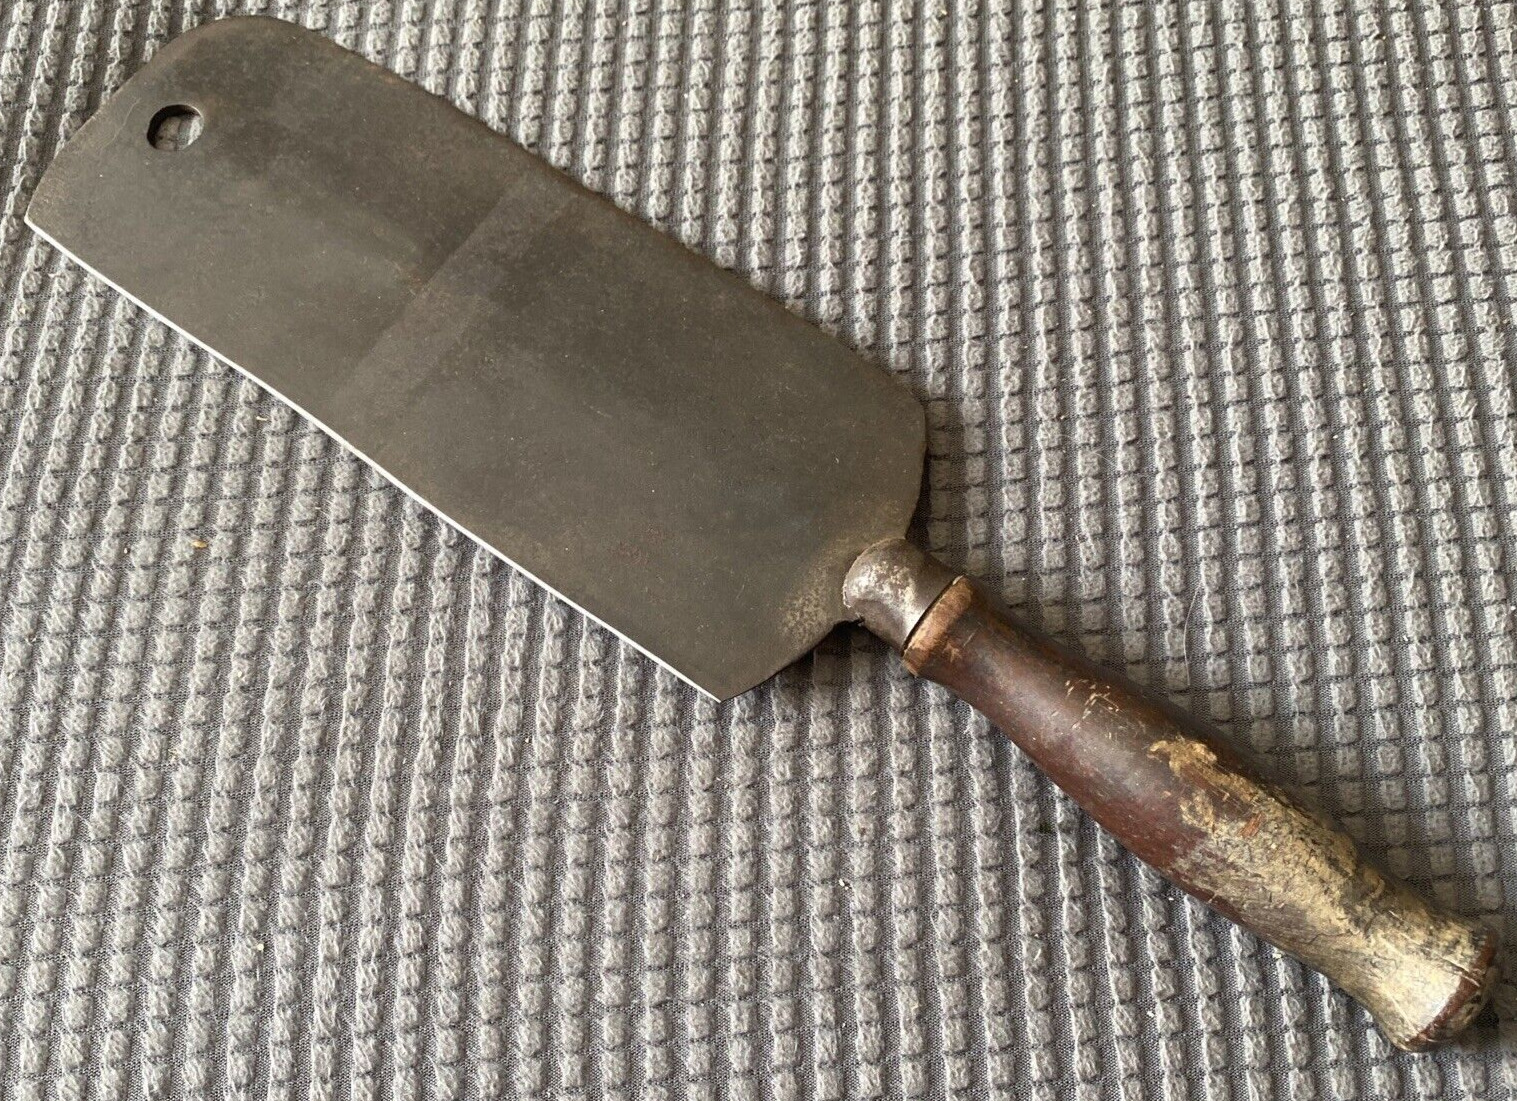 Unusual Antique Knife-Unmarked-Wide Flat Blade, Unknown Use